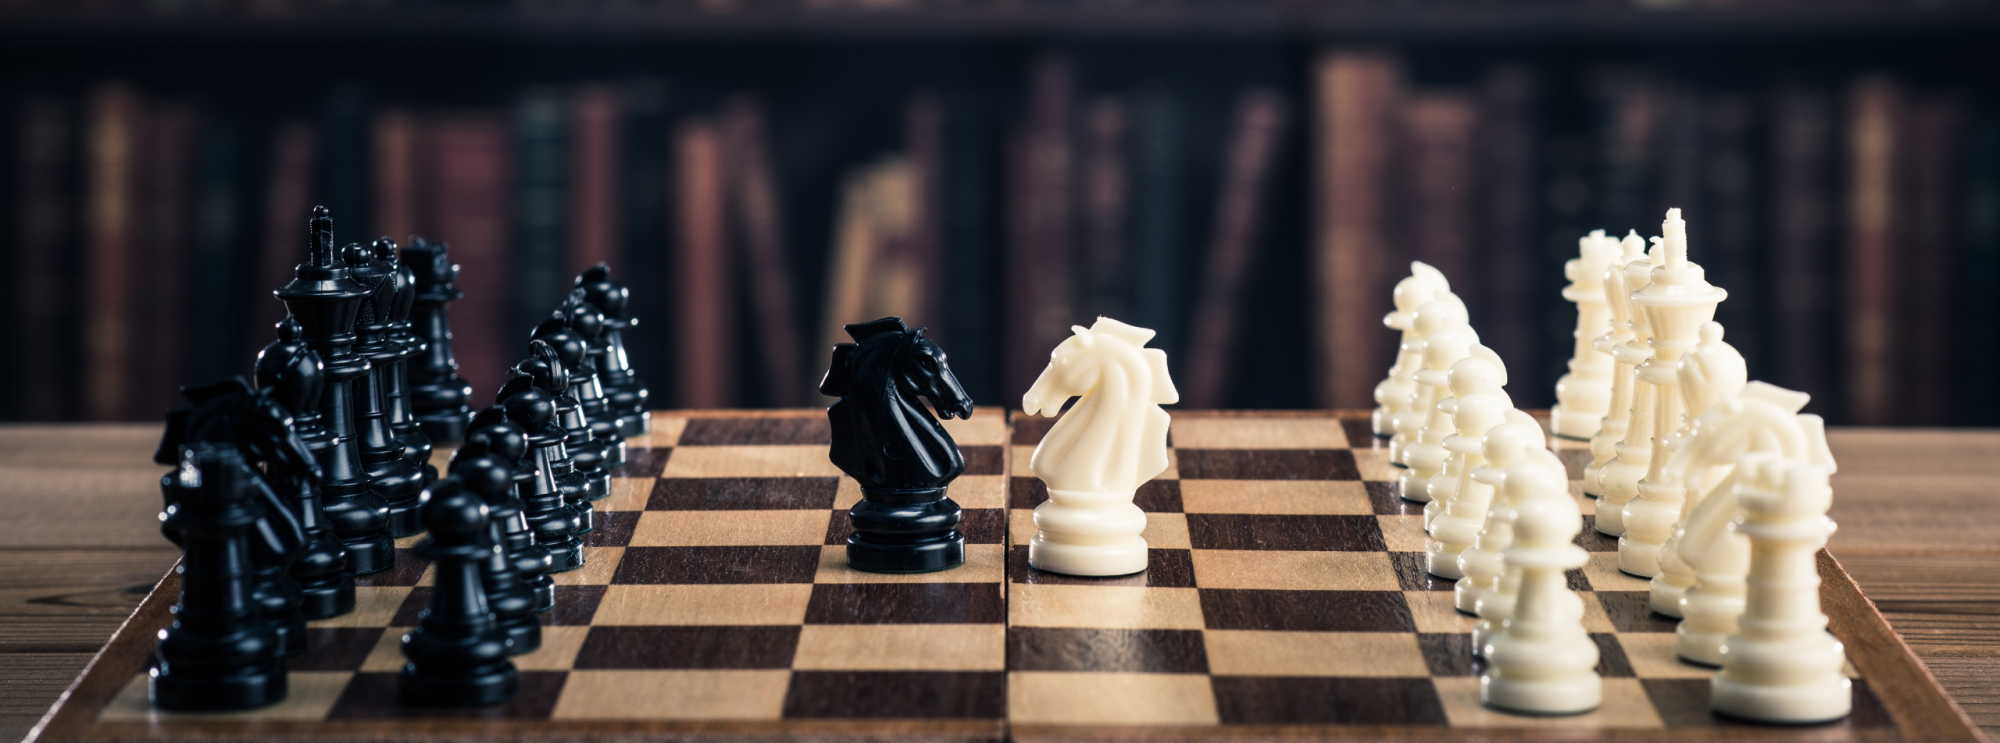 The Amateur's mind : turning chess misconceptions into chess